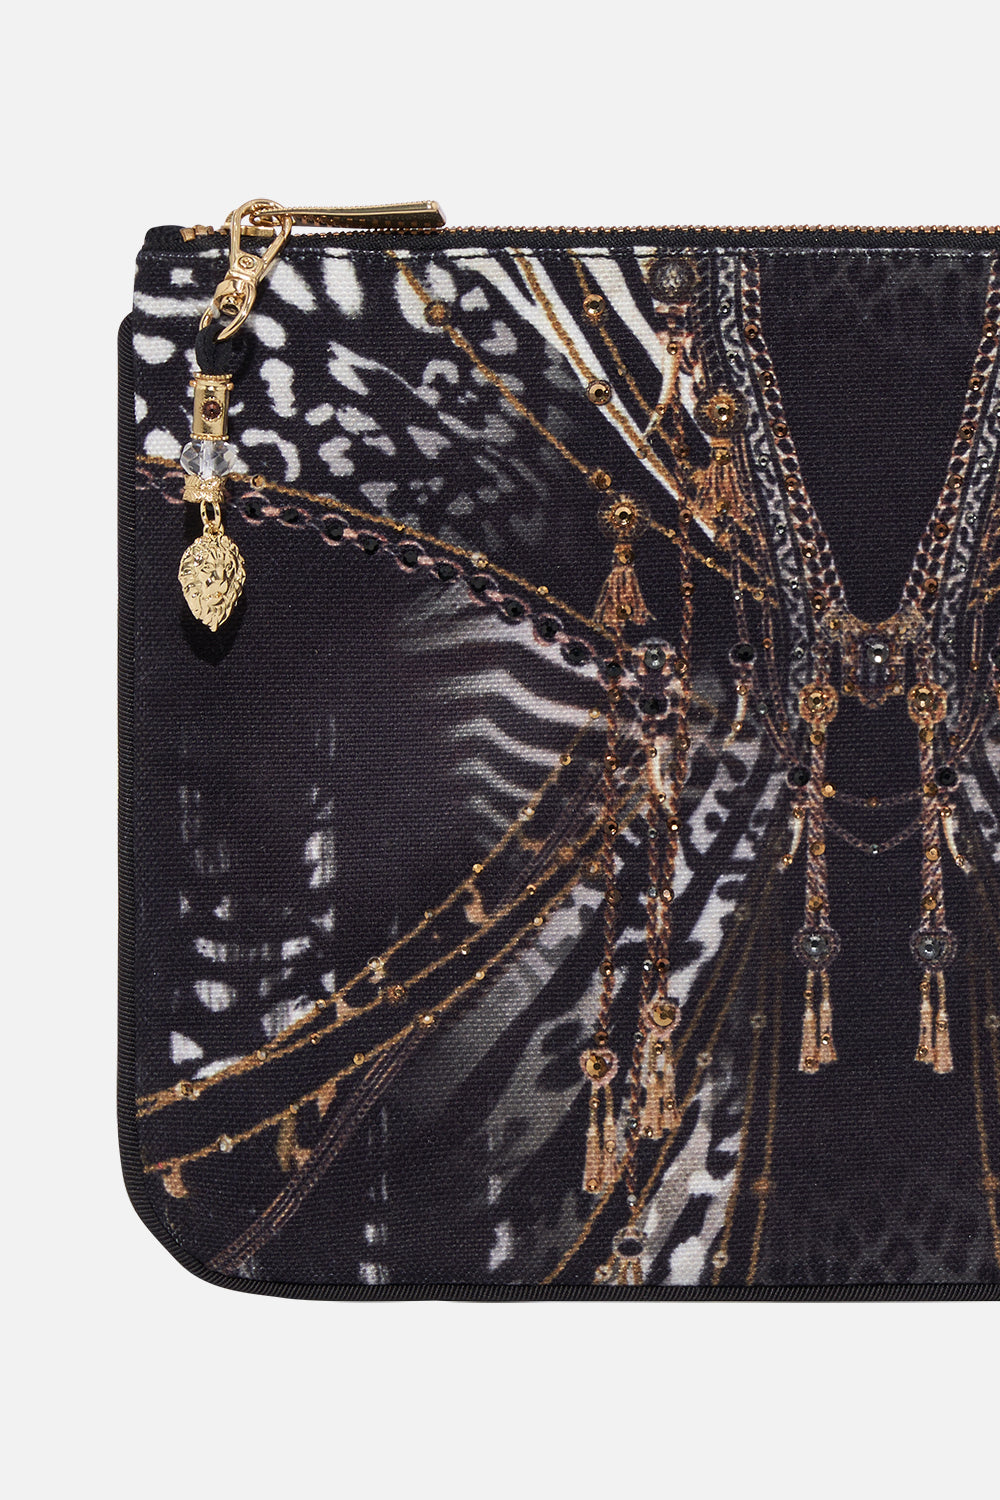 Detail view of CAMILLA clutch bag in Untamed Royalty print